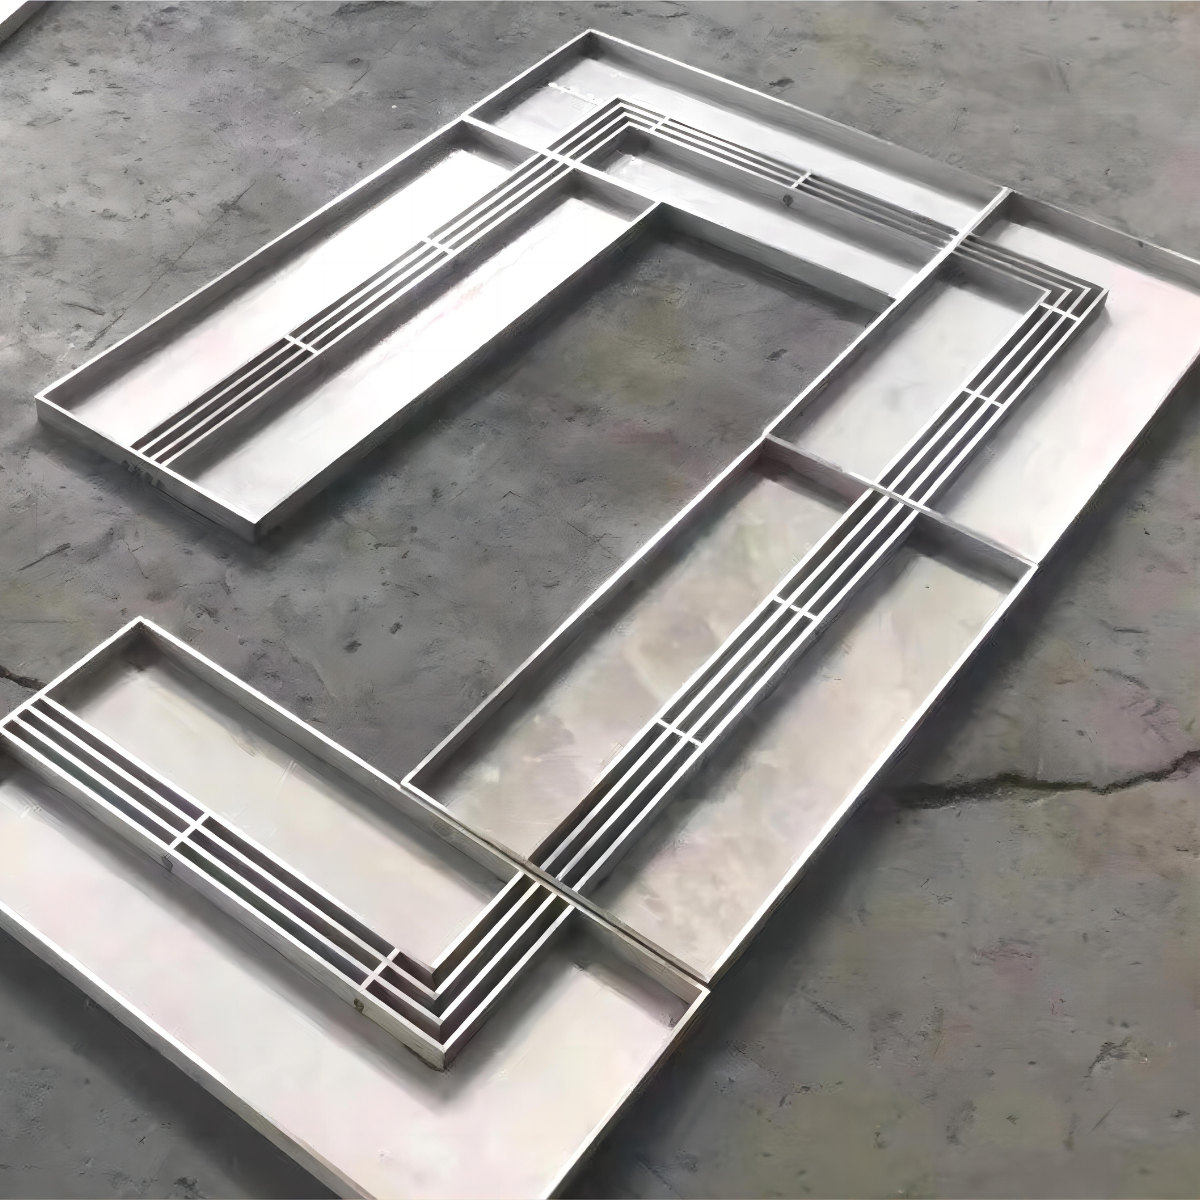 Stainless steel linear gutter cover Precast resin ditch Slit drain cover Concealed gutter cover Squares roads Drainage system